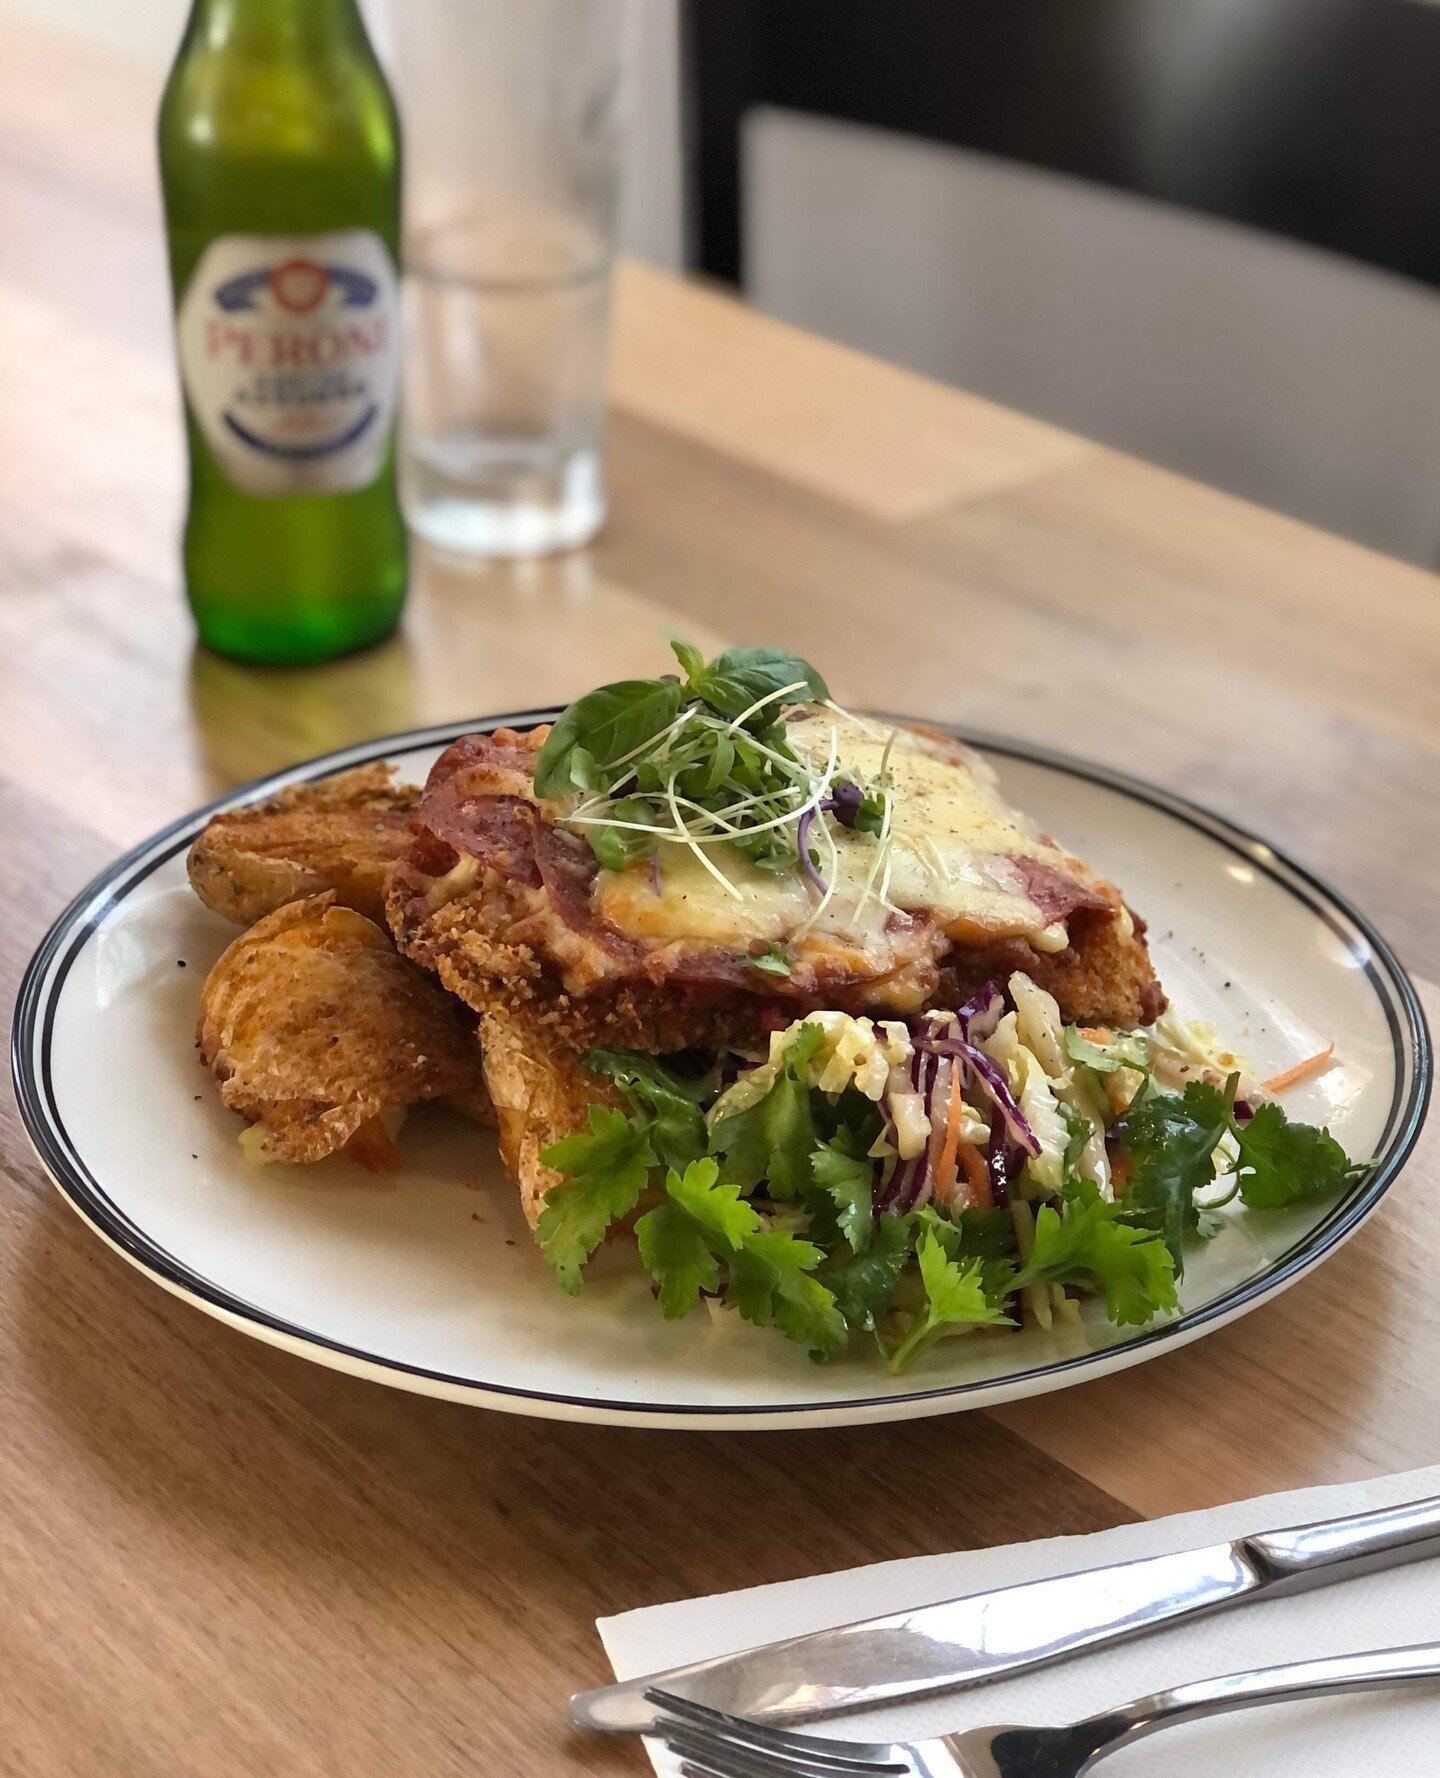 ✨ WEEKEND SPECIAL! ✨ Chicken &amp; Pepperoni Parma with Roasted Kipfler Potatoes &amp; Mixed Herb Coleslaw!⁠
⁠
⁠
⁠
⁠
#extractedivanhoe #coffee #ivanhoecafe #dineinivanhoe #melbournecafe #hungry #delicious​#breakfast #healthylifestyle #supportlocal #b